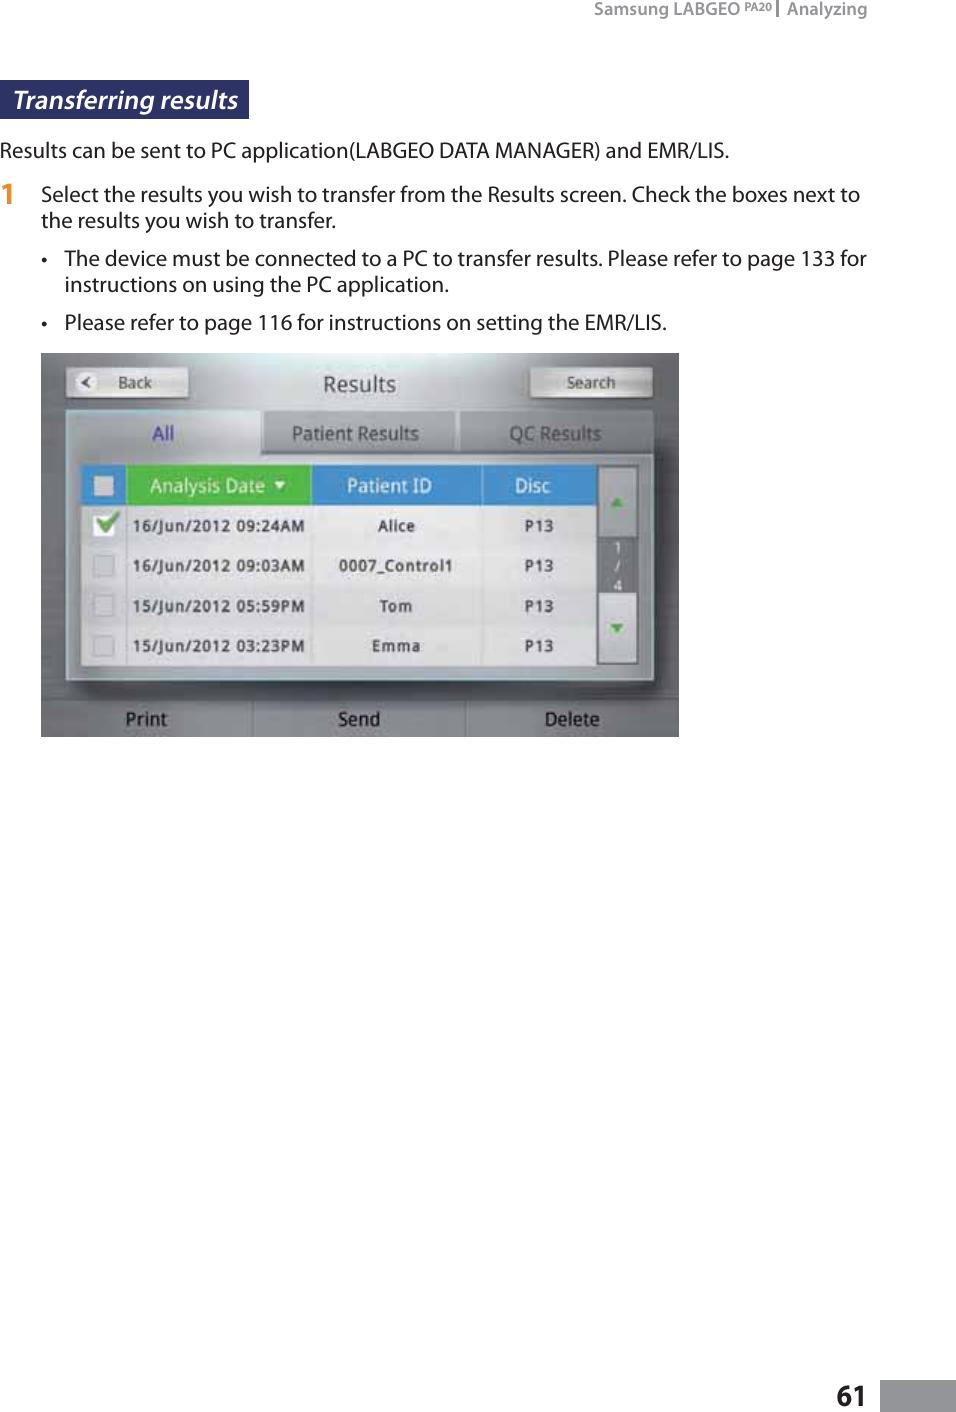 61Samsung LABGEO PA20   AnalyzingTransferring resultsResults can be sent to PC application(LABGEO DATA MANAGER) and EMR/LIS.1  Select the results you wish to transfer from the Results screen. Check the boxes next to the results you wish to transfer.t The device must be connected to a PC to transfer results. Please refer to page 133 for instructions on using the PC application.t Please refer to page 116 for instructions on setting the EMR/LIS.